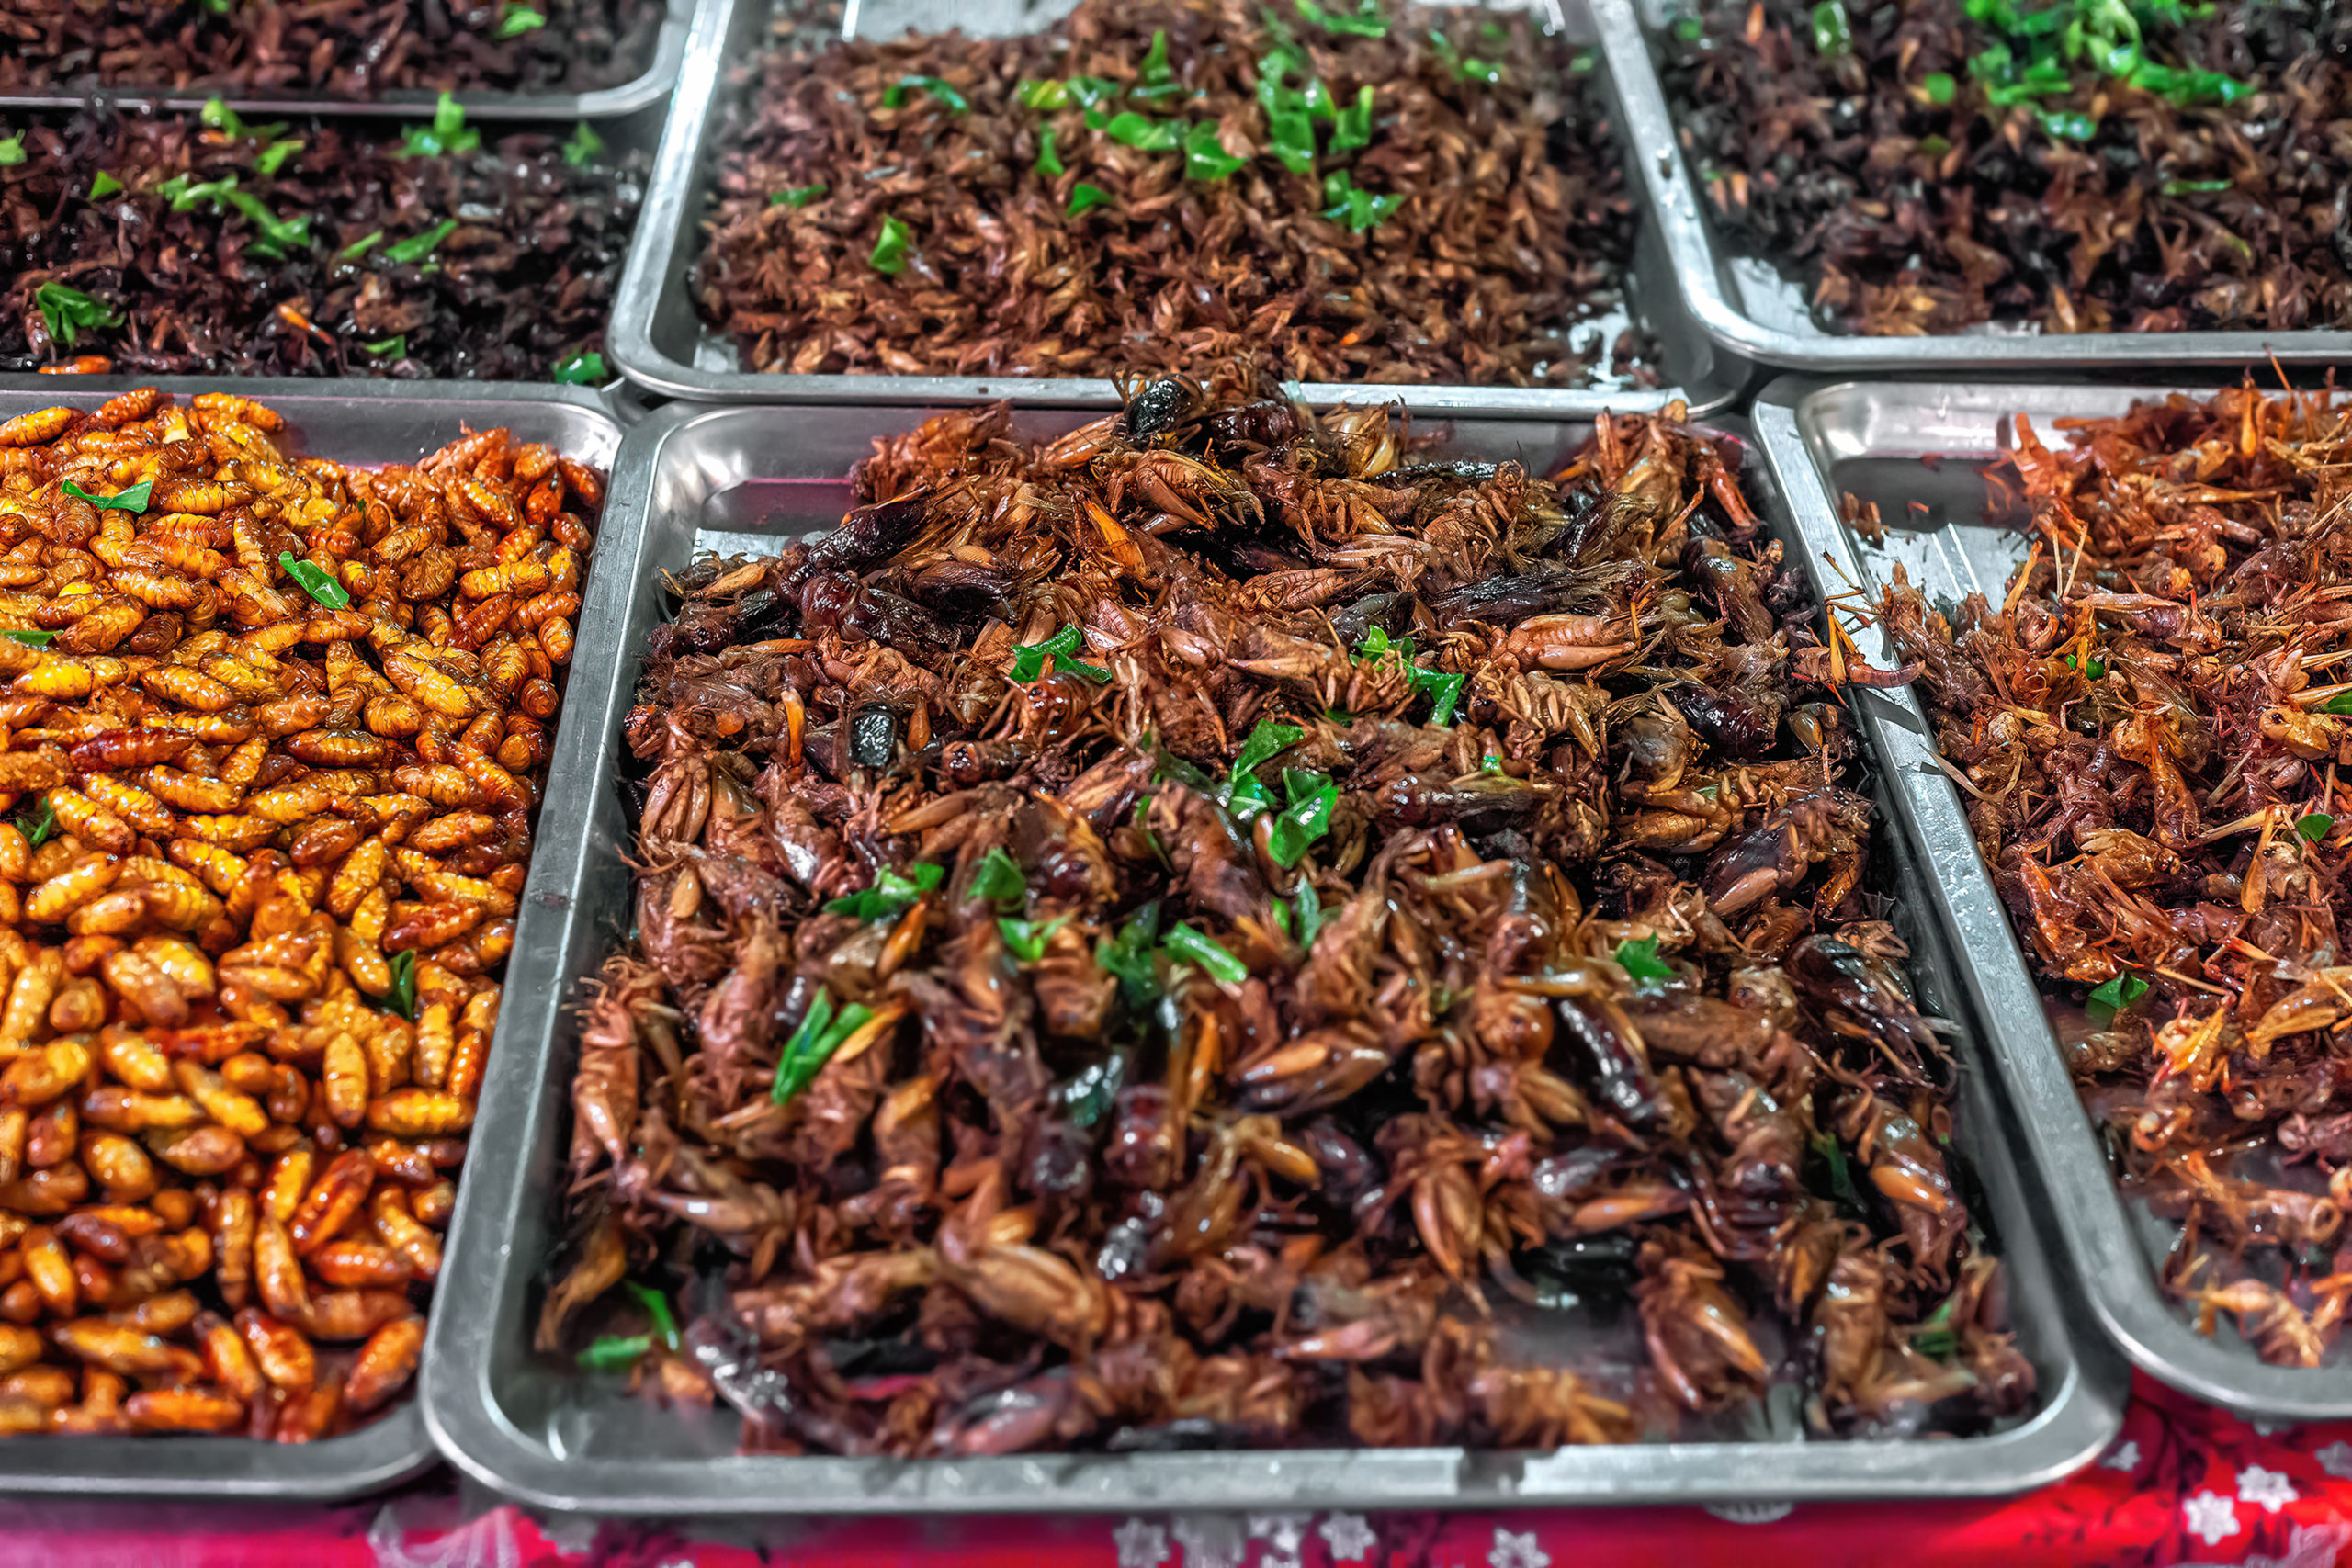 Insects for food